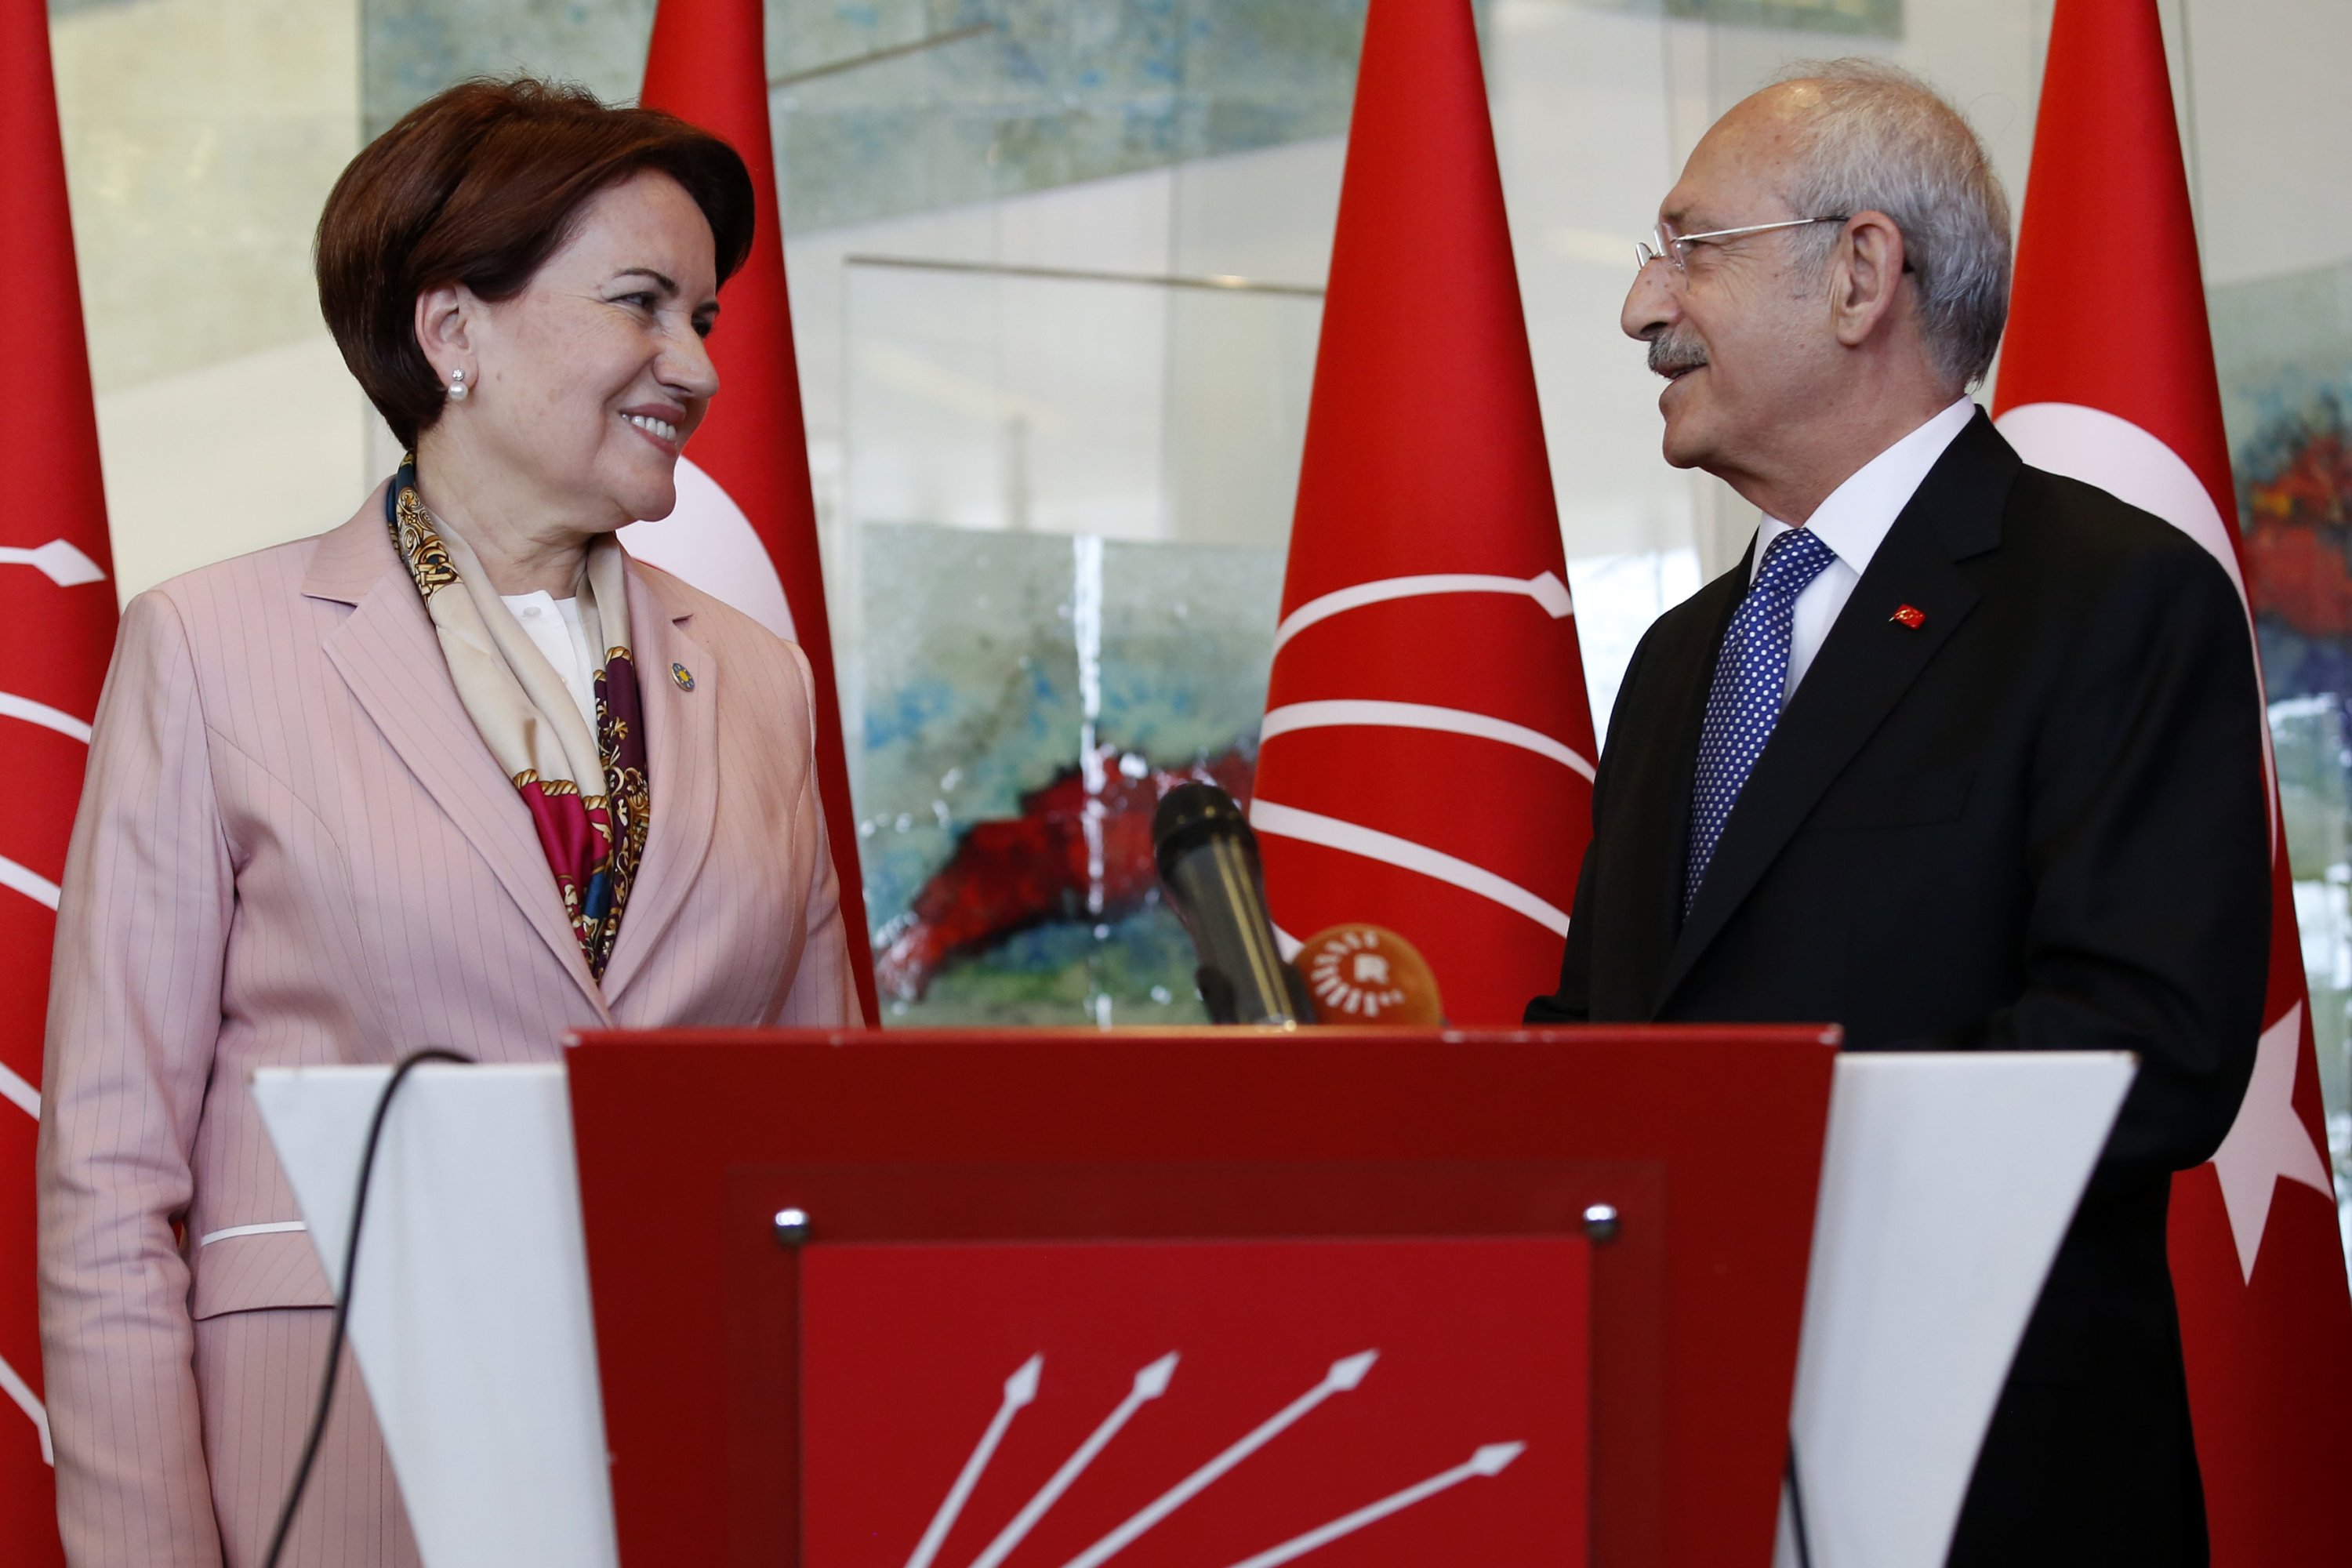 Kemal Kılıçdaroğlu (R), chairperson of the Republican People's Party (CHP), and the leader of the Good Party (IP), Meral Akşener (L), give a joint press conference at CHP headquarters in Ankara, Turkey, April 25, 2018. (Getty Images Photo)